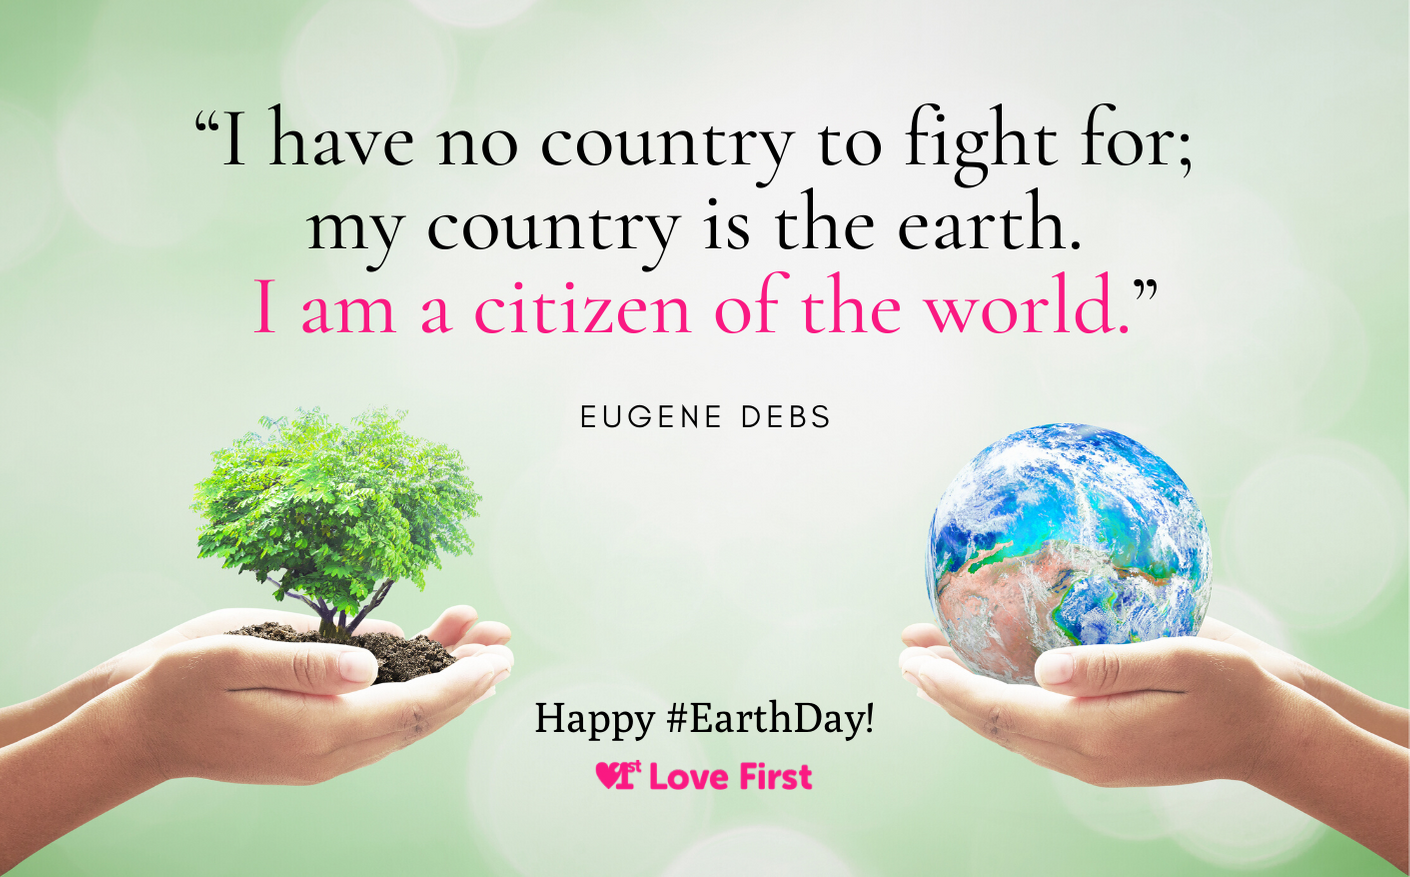 Happy Earth Day, 2020!